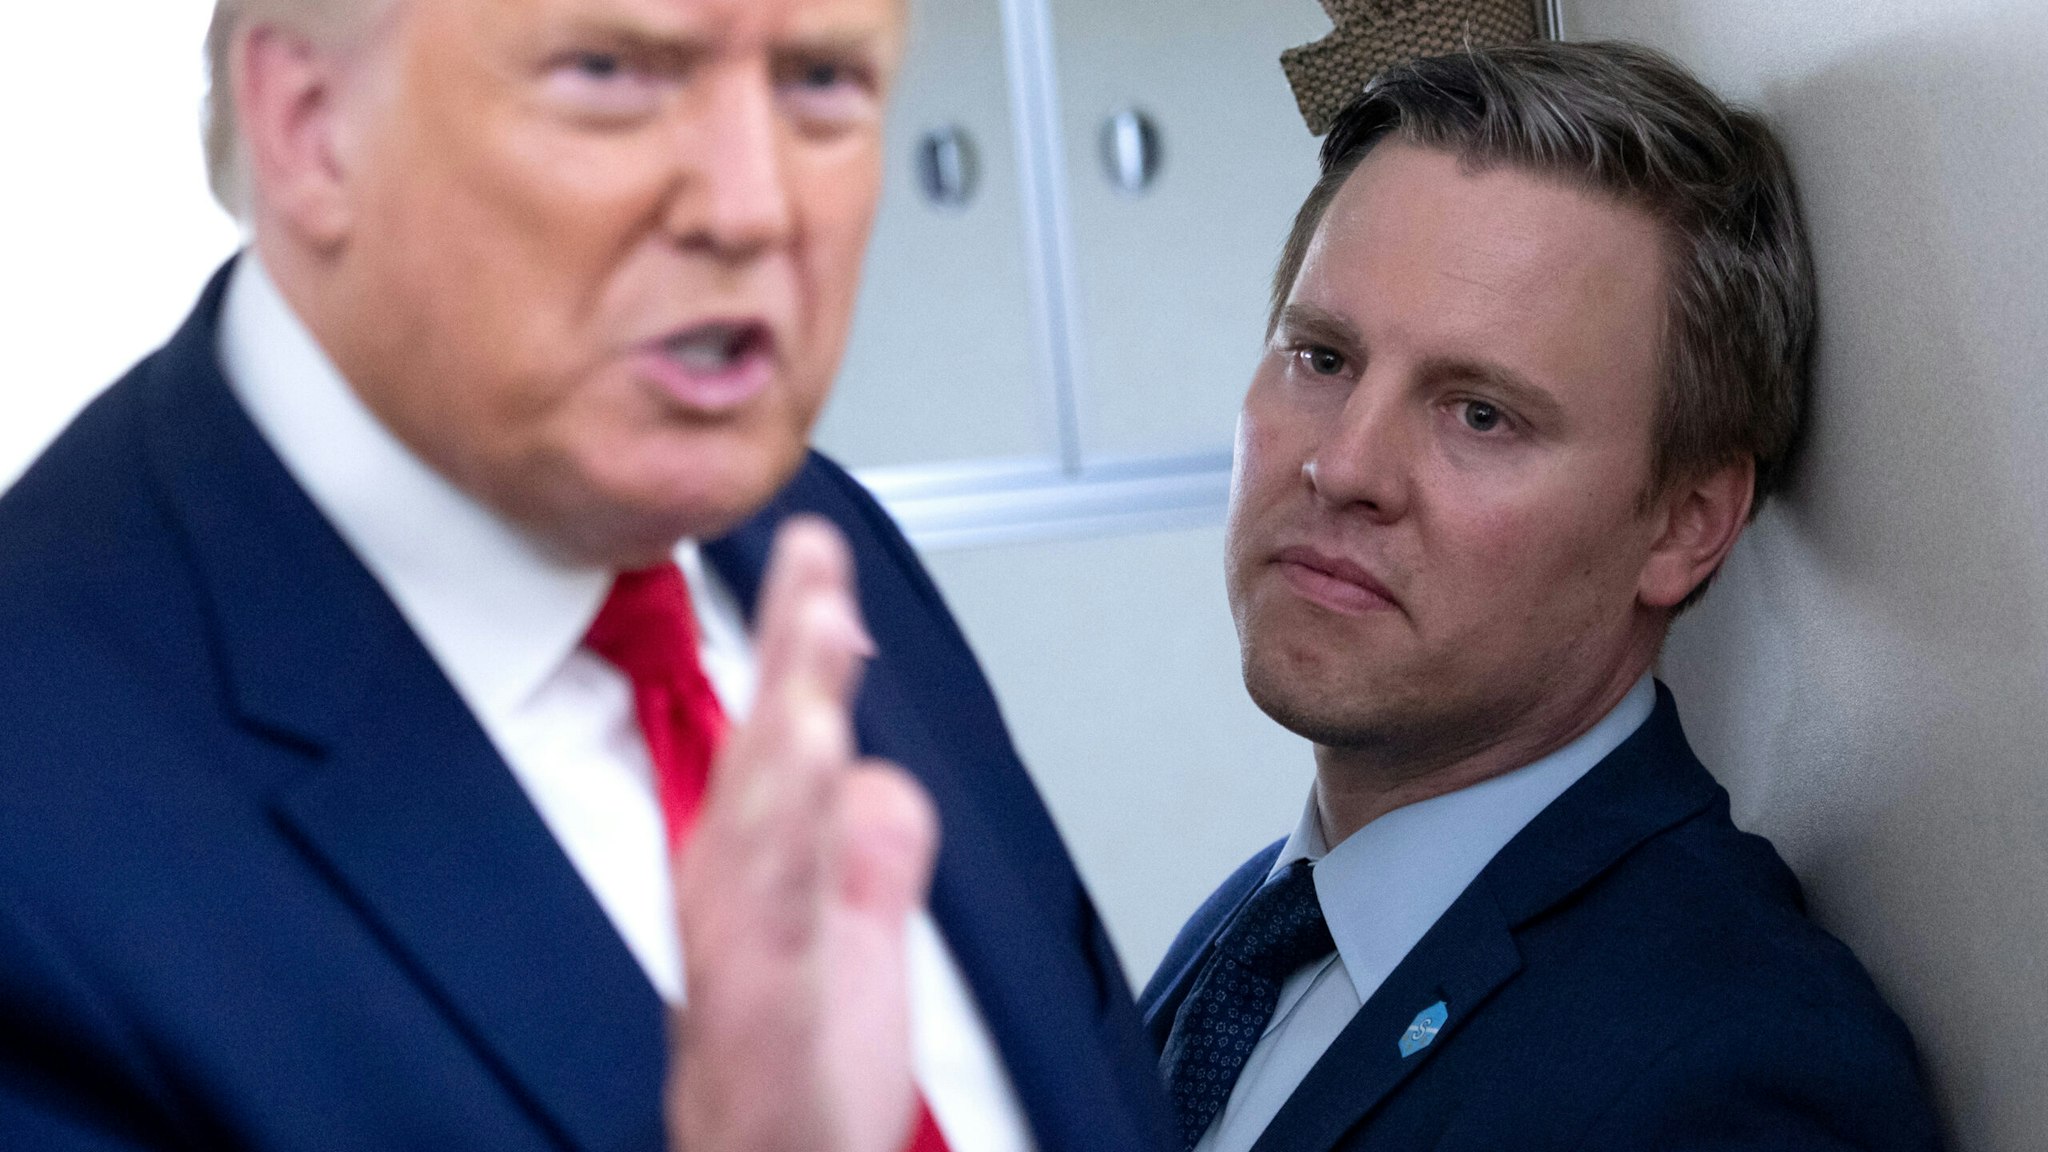 Campaign manager Bill Stepien stands alongside US President Donald Trump as he speaks with reporters aboard Air Force One as he flies from Manchester, New Hampshire to Joint Base Andrews in Maryland, August 28, 2020, following a campaign rally.